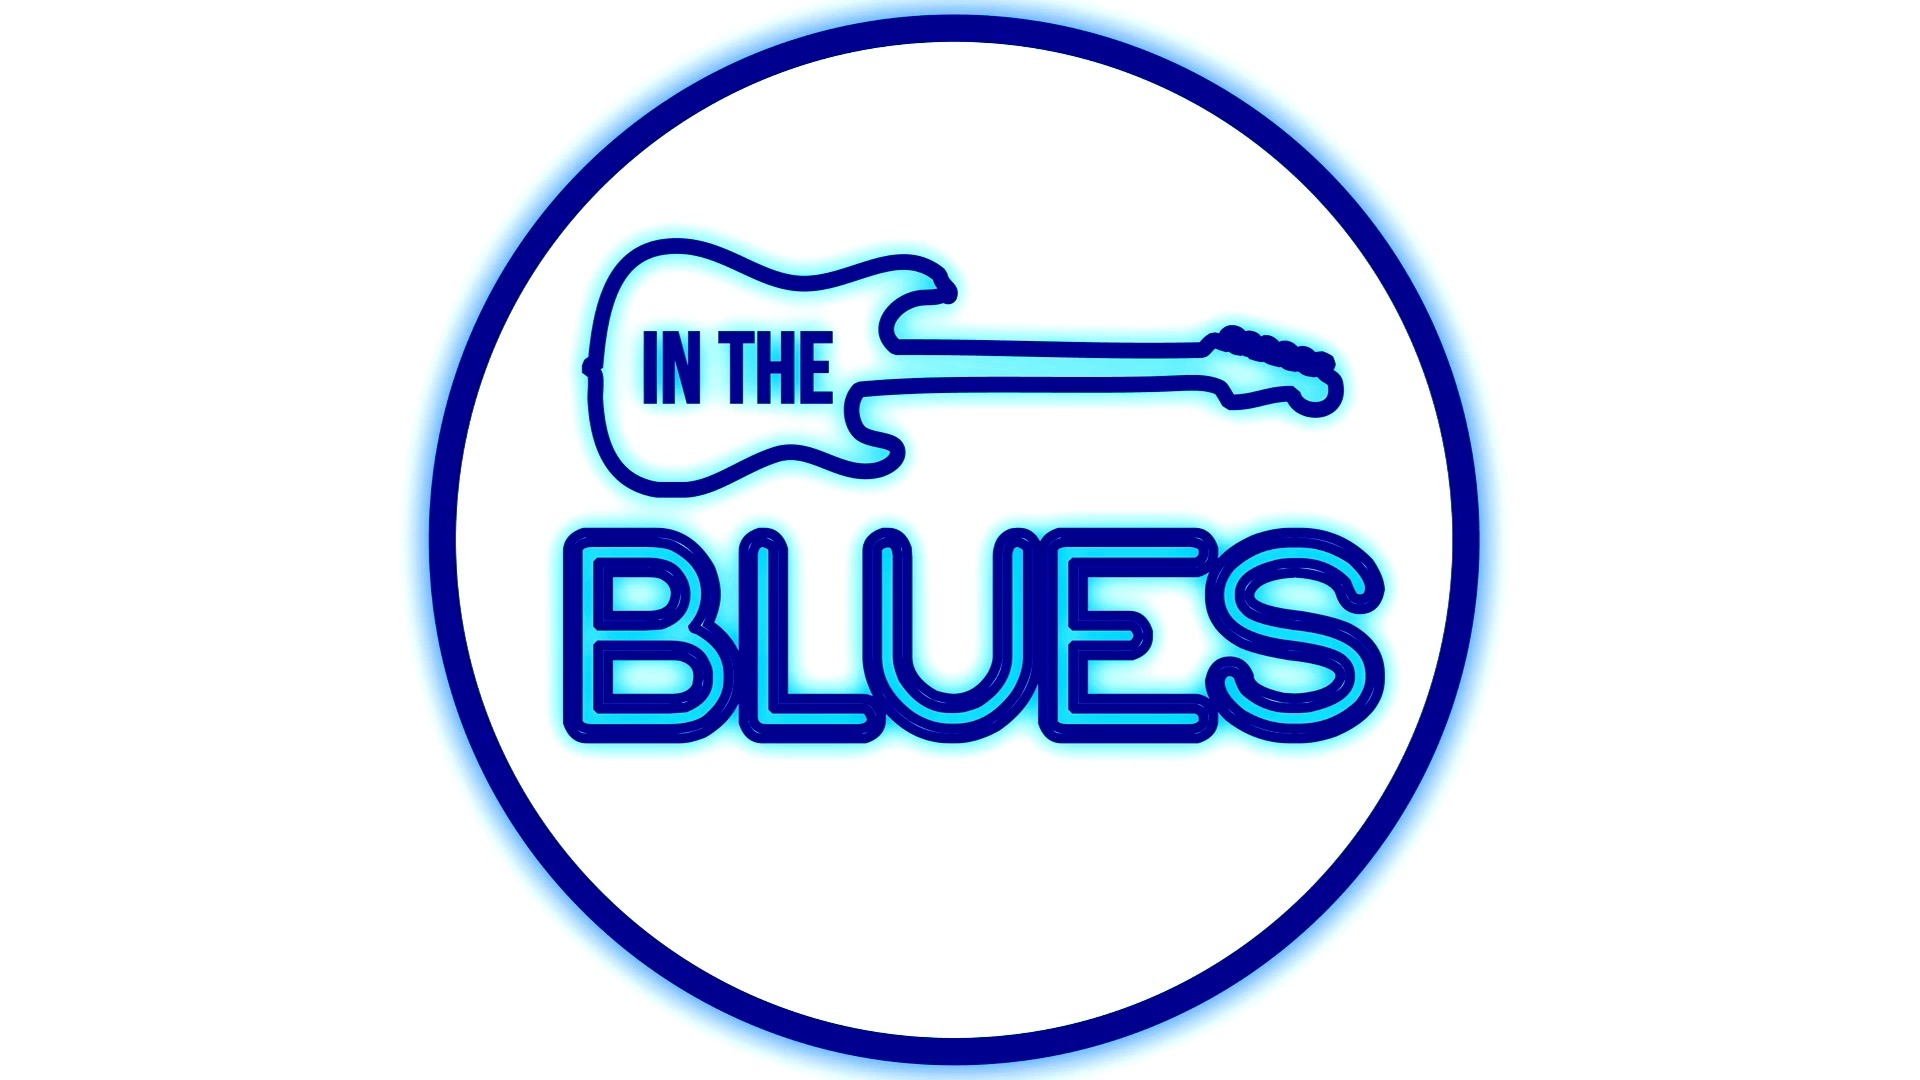 Reviews by intheblues